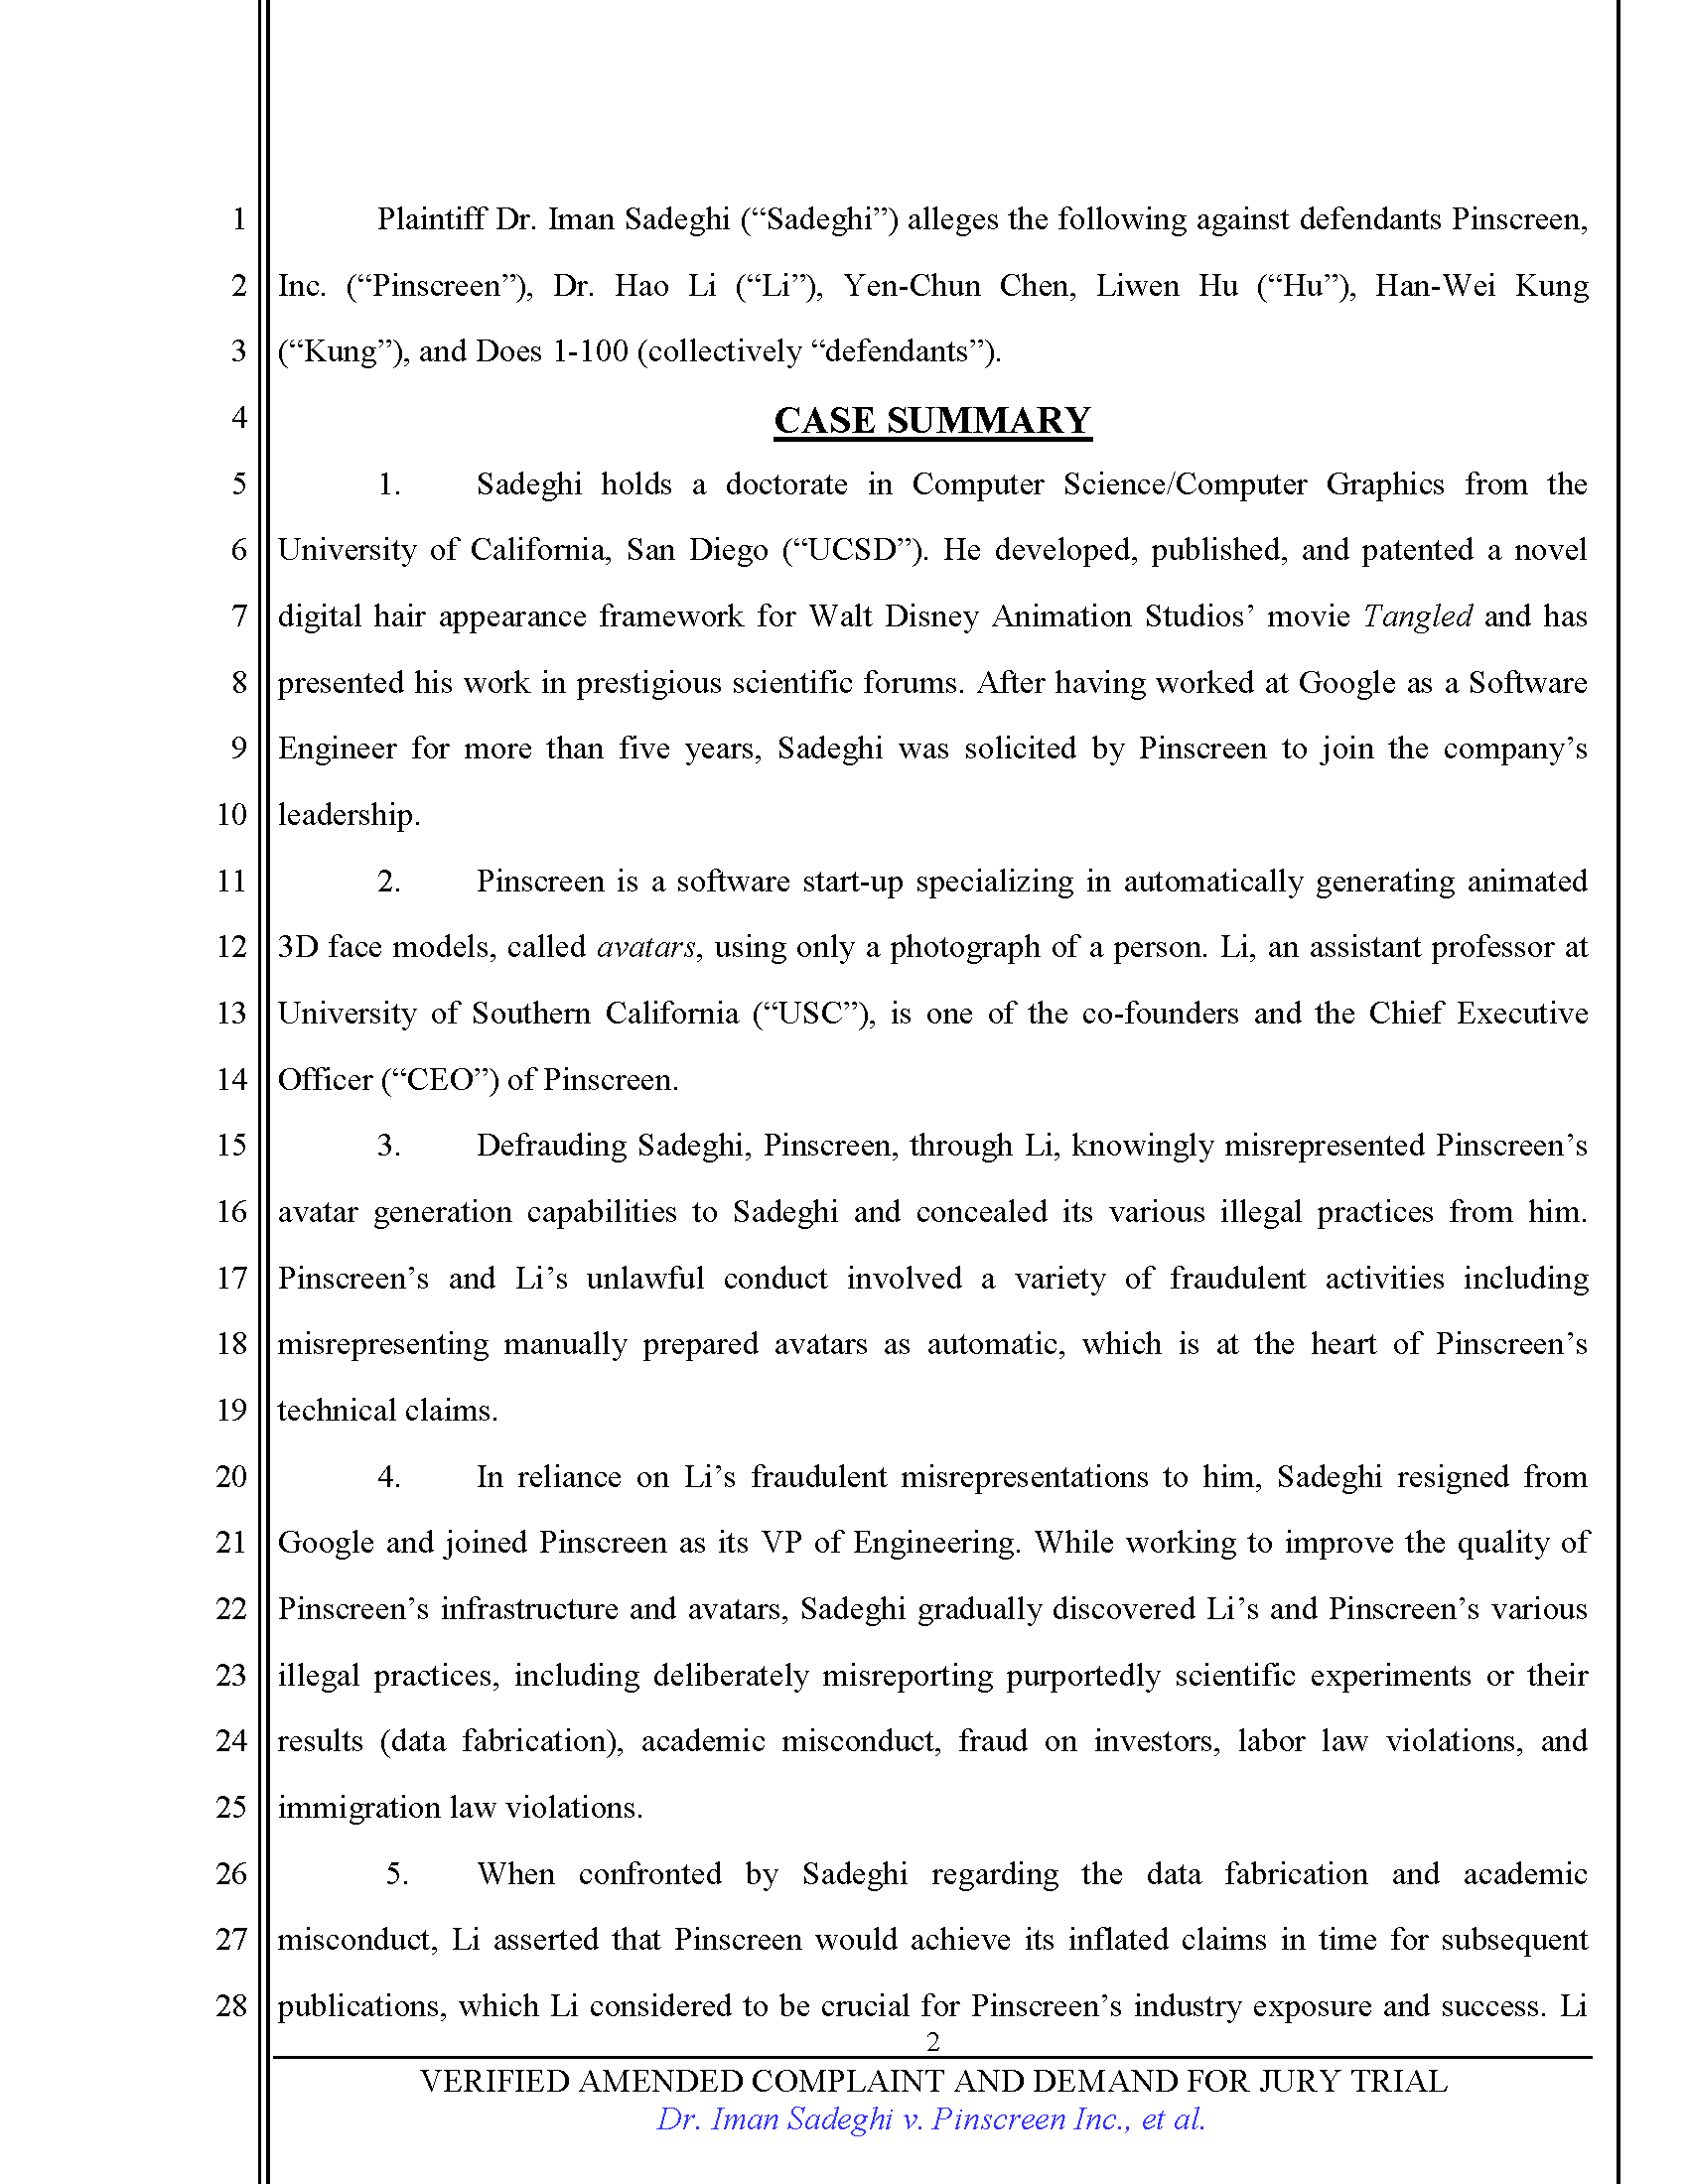 First Amended Complaint (FAC) Page 2